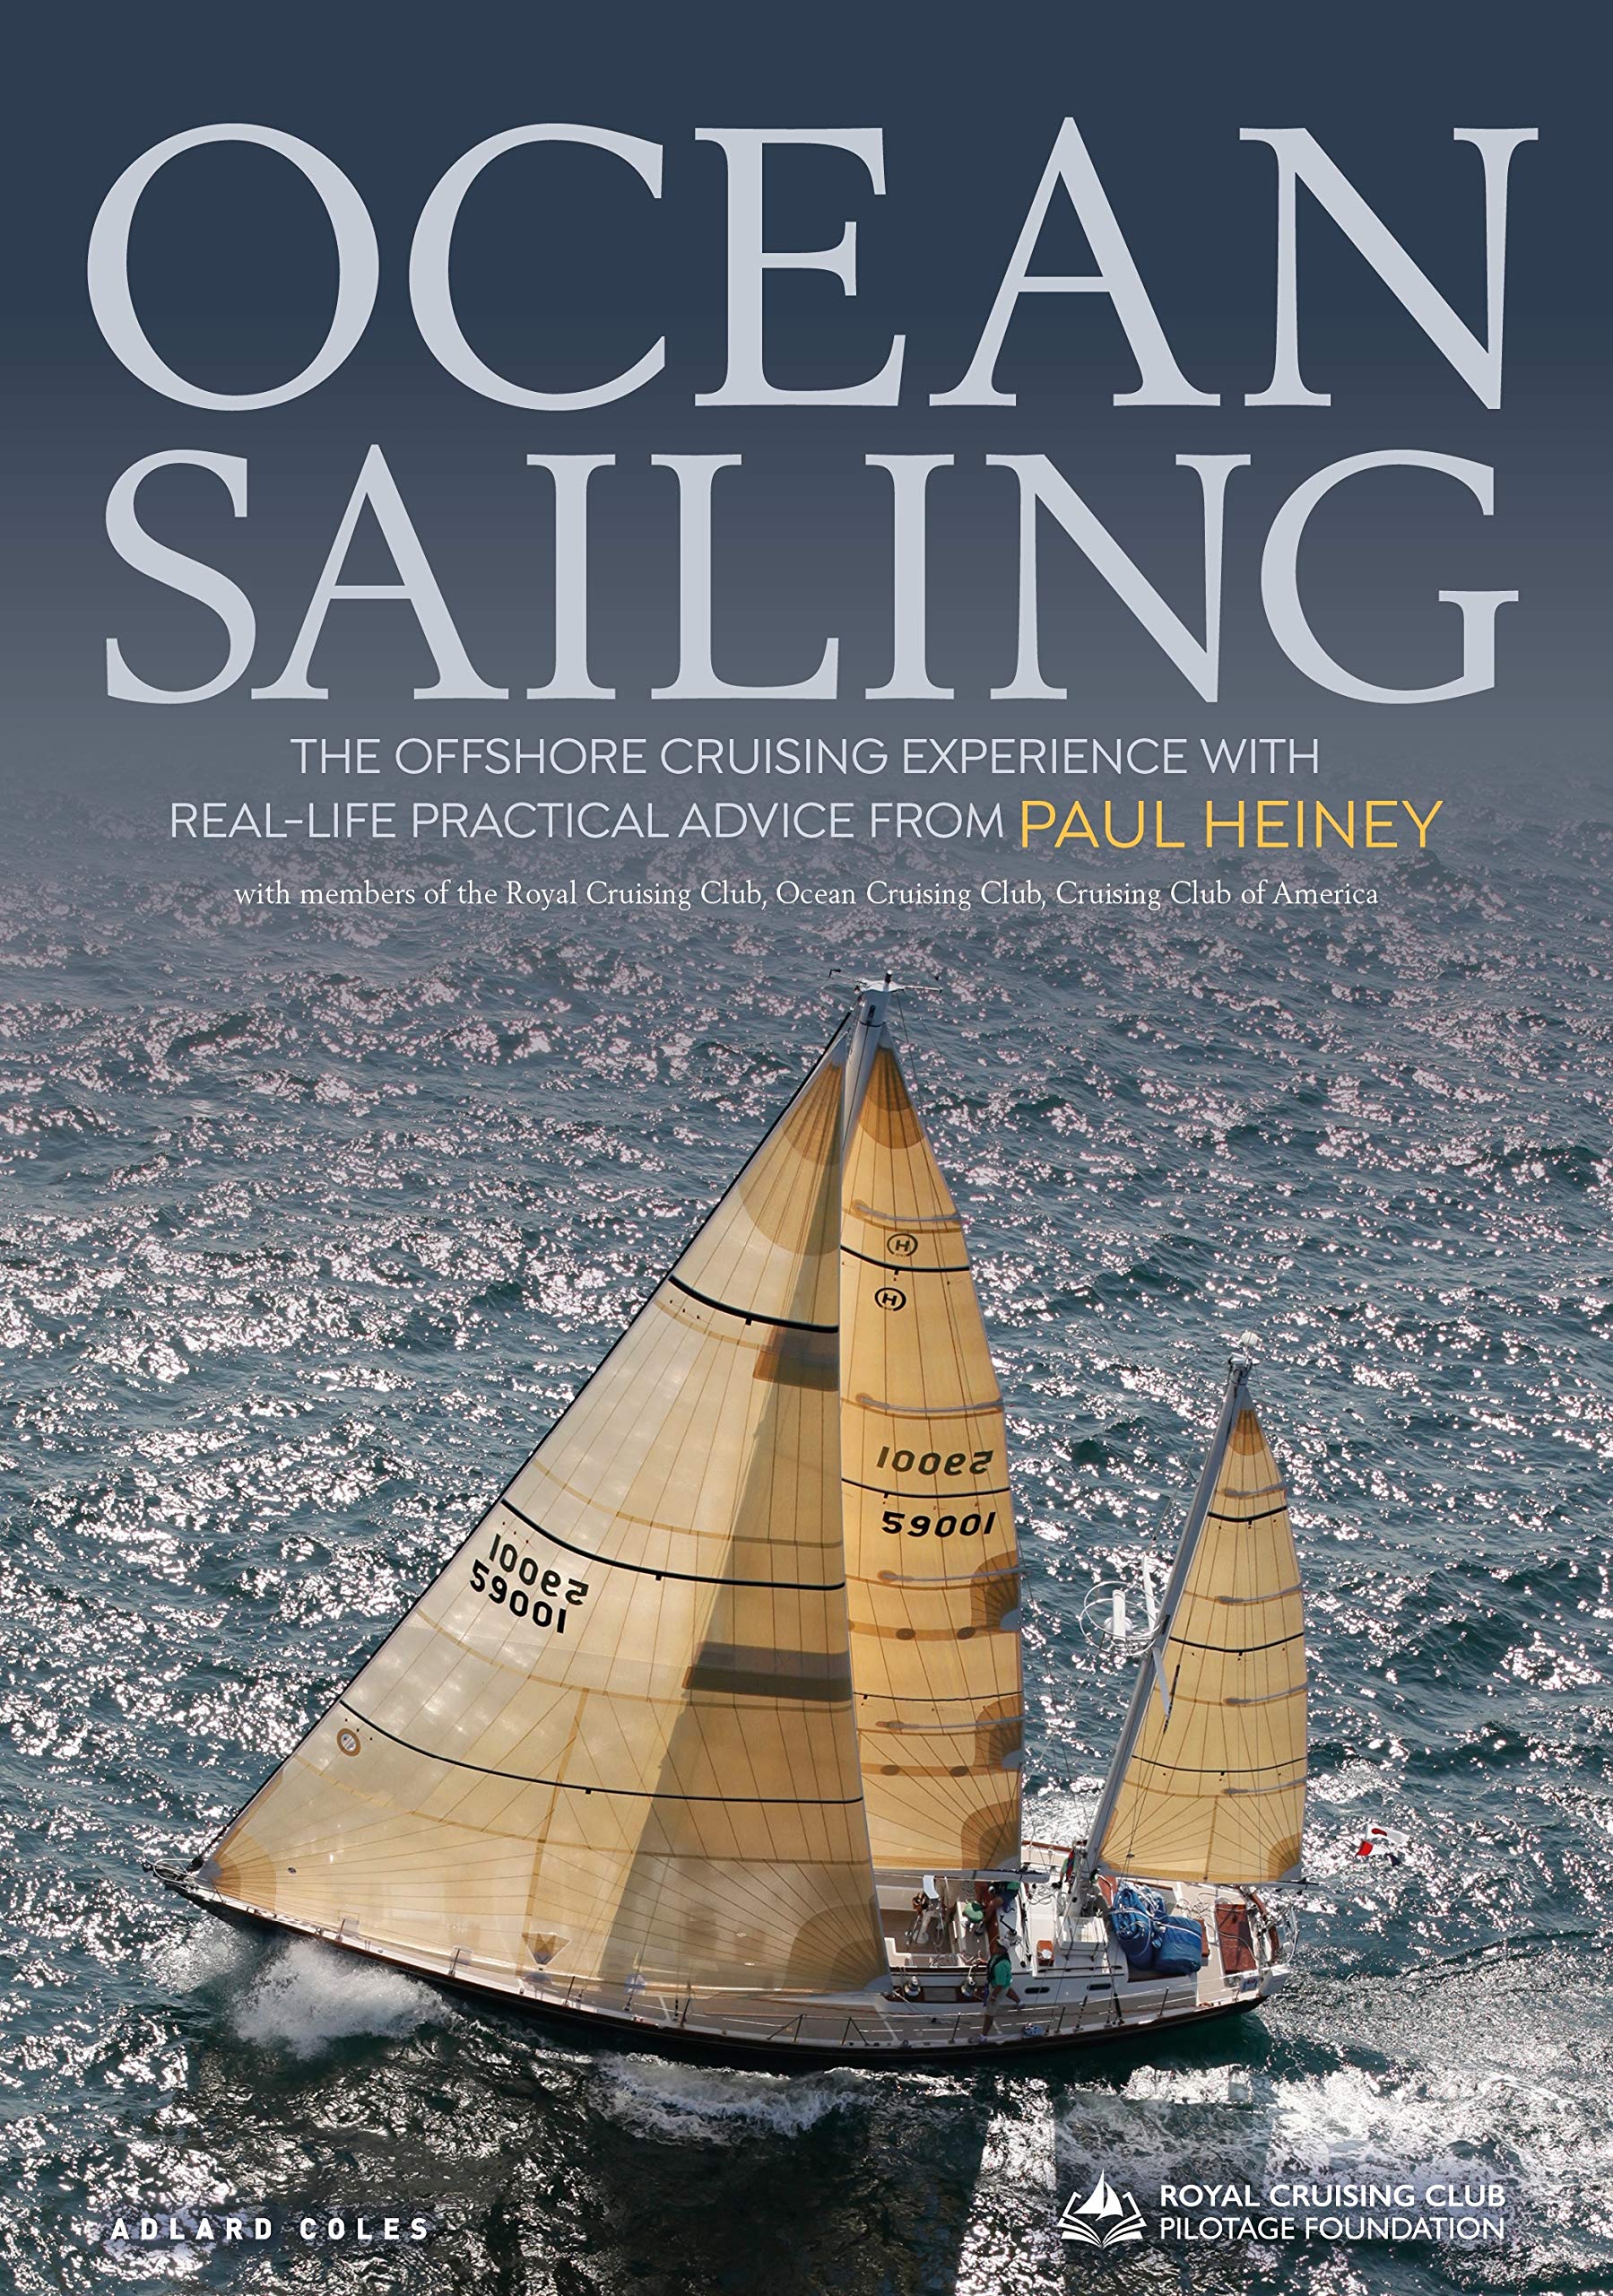 Bluewater Sailing, Circumnavigation, Ocean Sailing: The Offshore Cruising Experience with Real-life Practical Advice